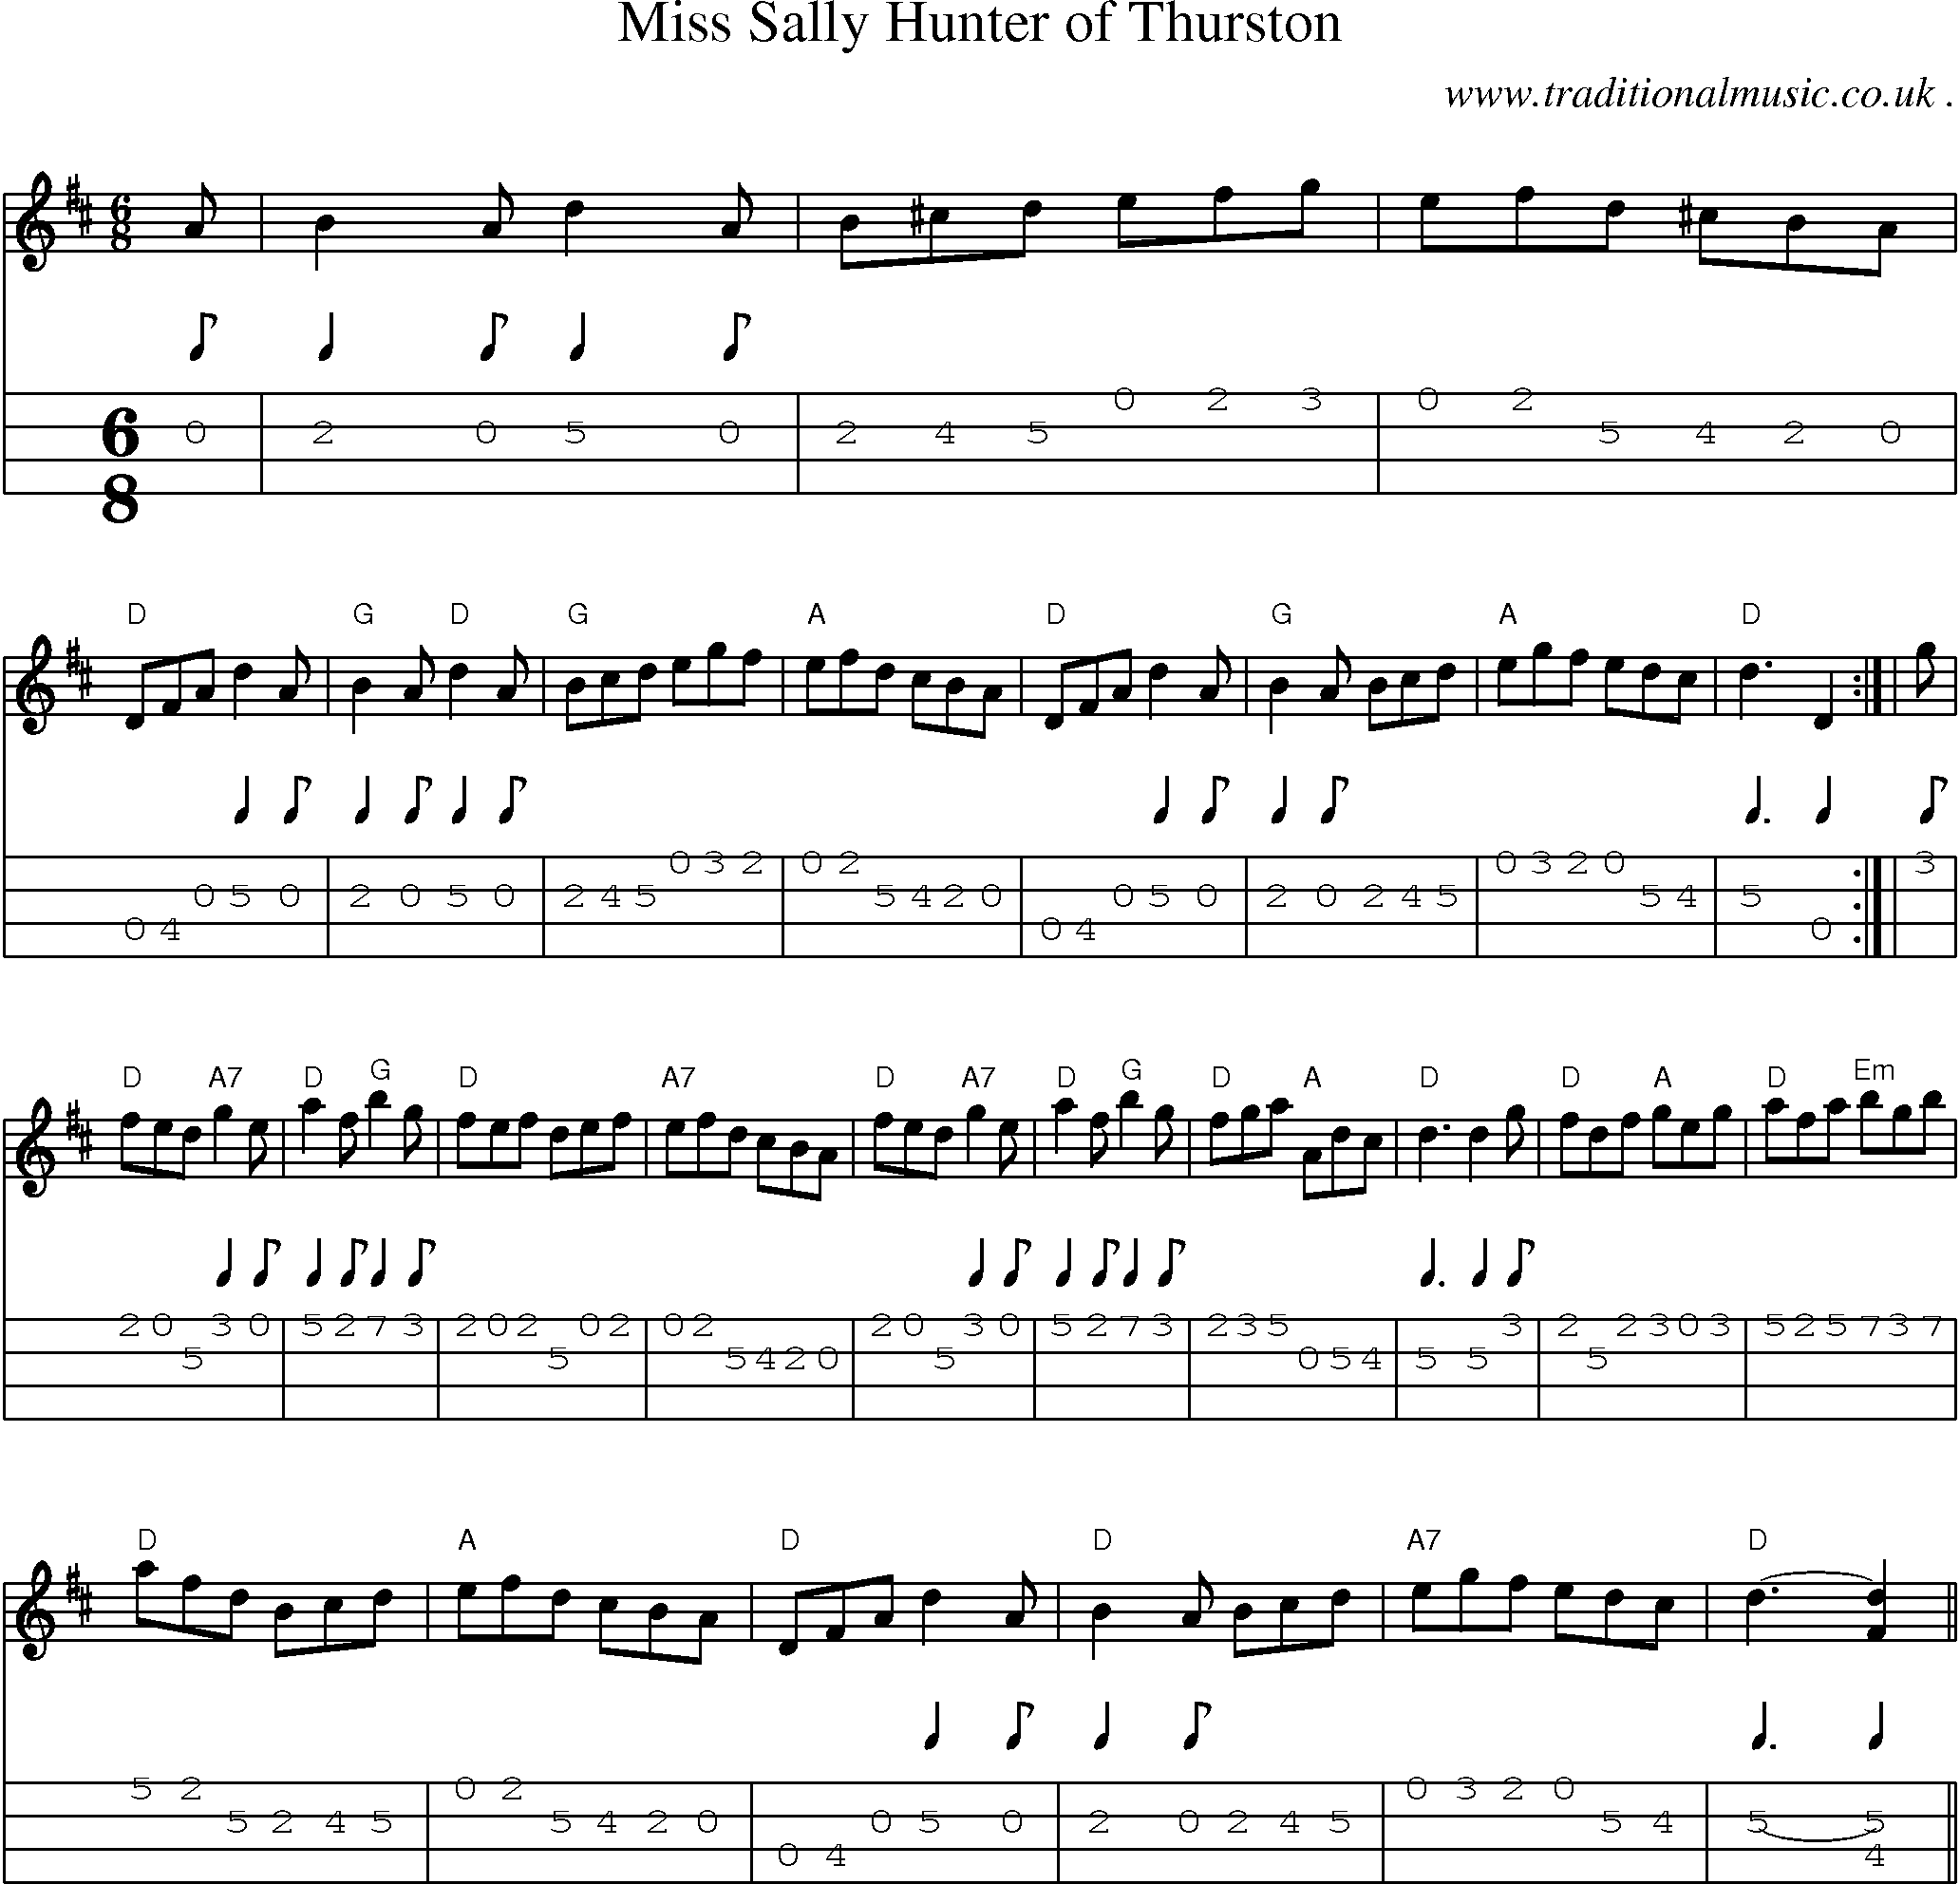 Sheet-music  score, Chords and Mandolin Tabs for Miss Sally Hunter Of Thurston